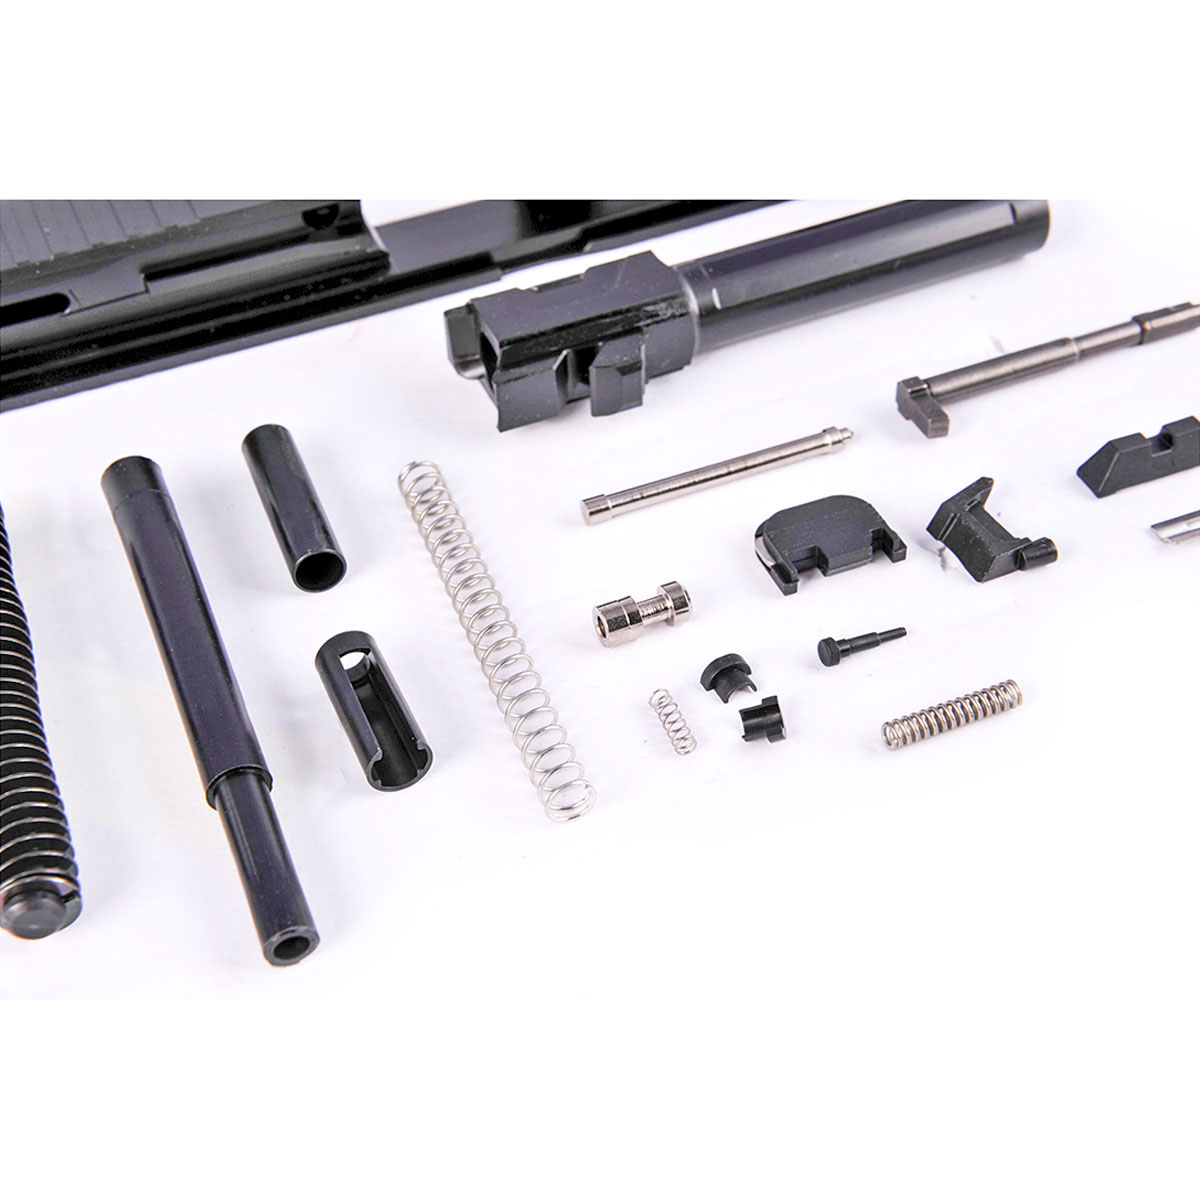 BROWNELLS - SLIDE FOR GLOCK 19 G3 WITH PORTED BBL AND COMPLETION KIT BUNDLE